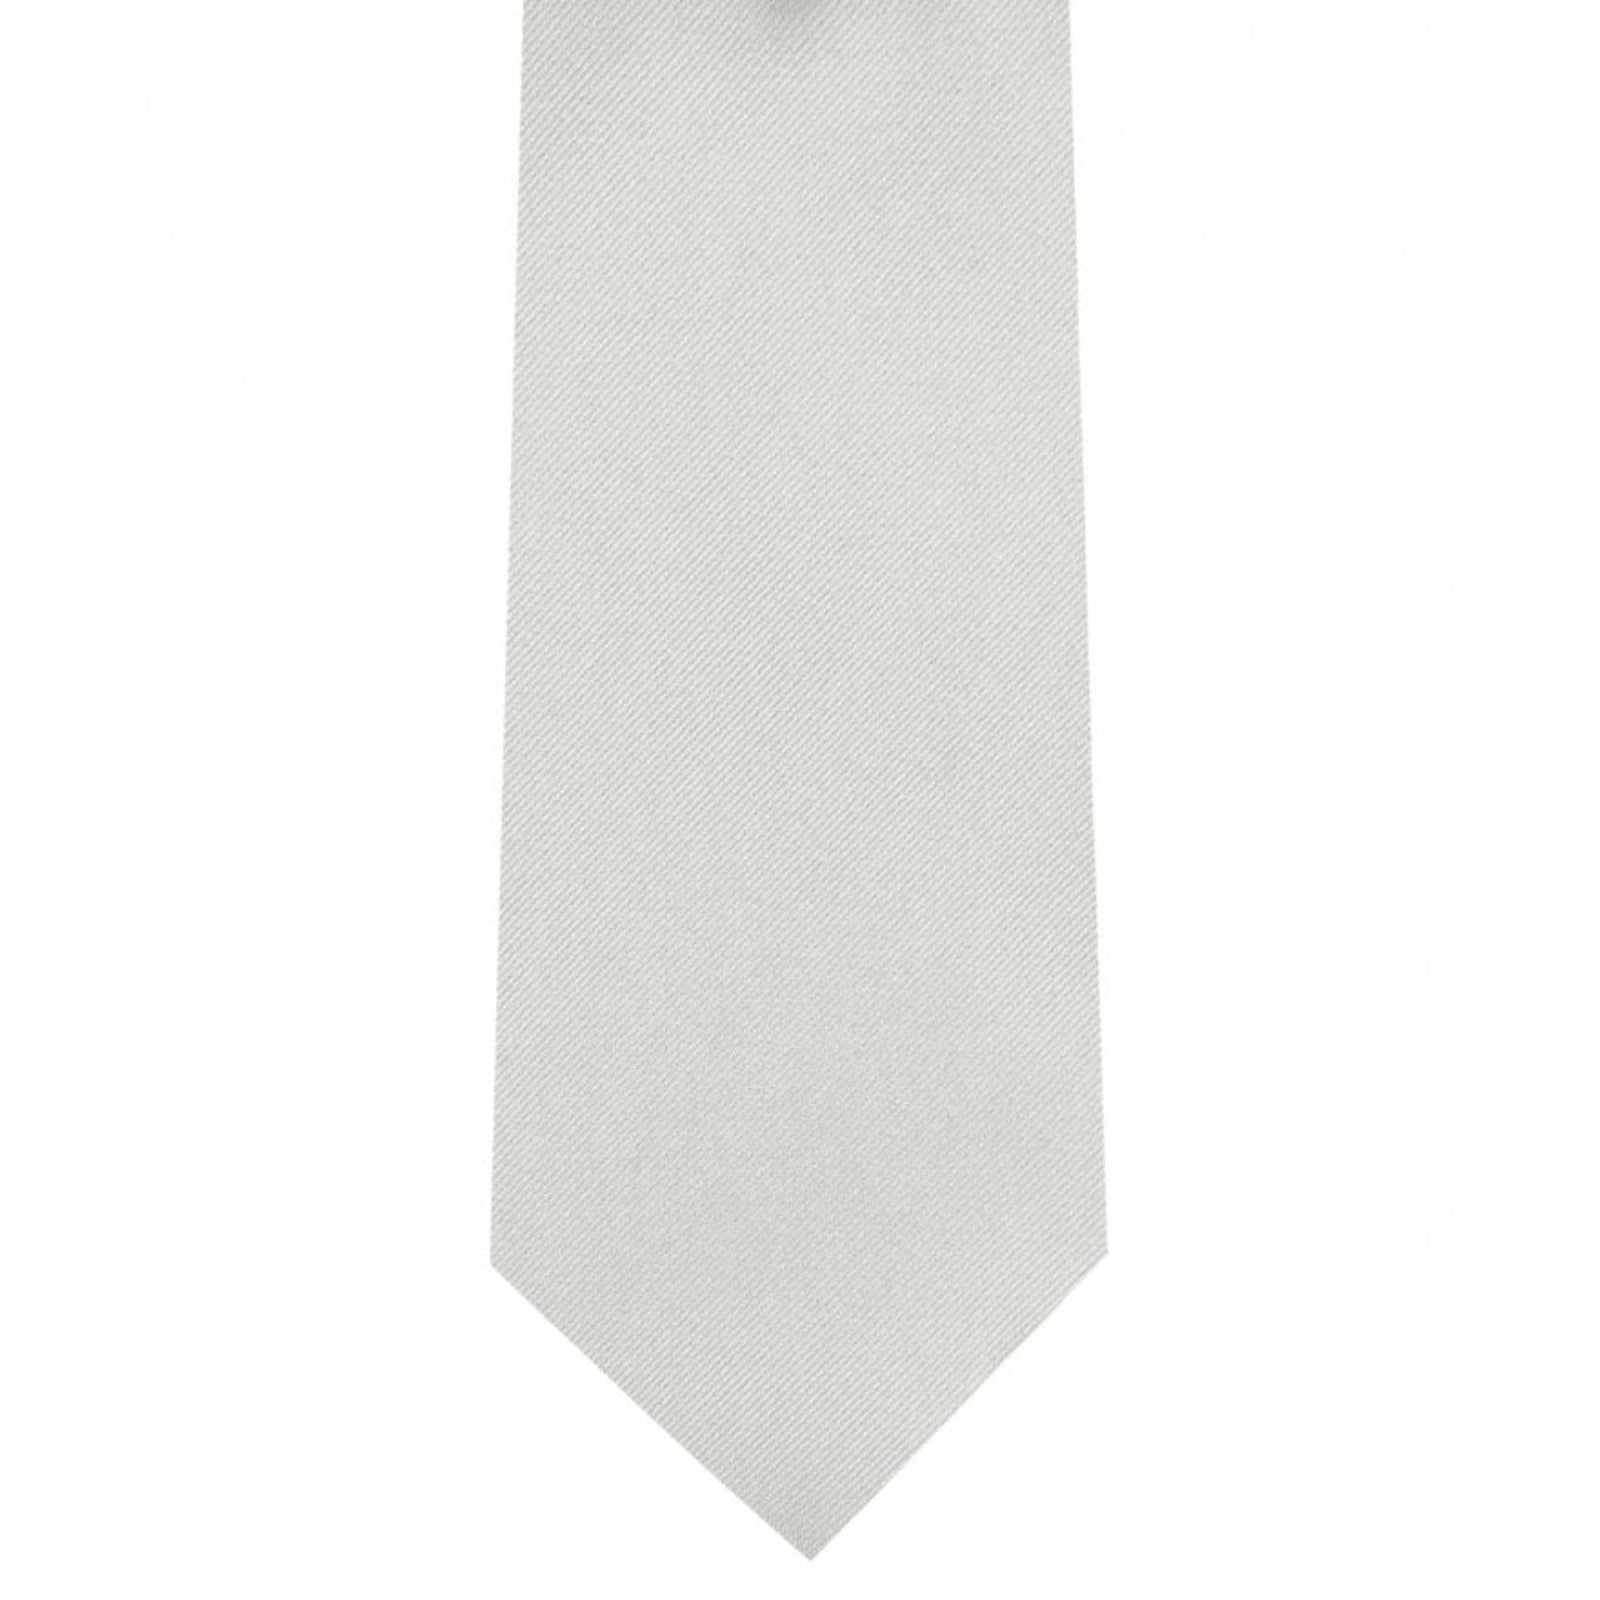 Classic Silver Tie Ultra Skinny tie width 2.25 inches With Matching Pocket Square | KCT Menswear